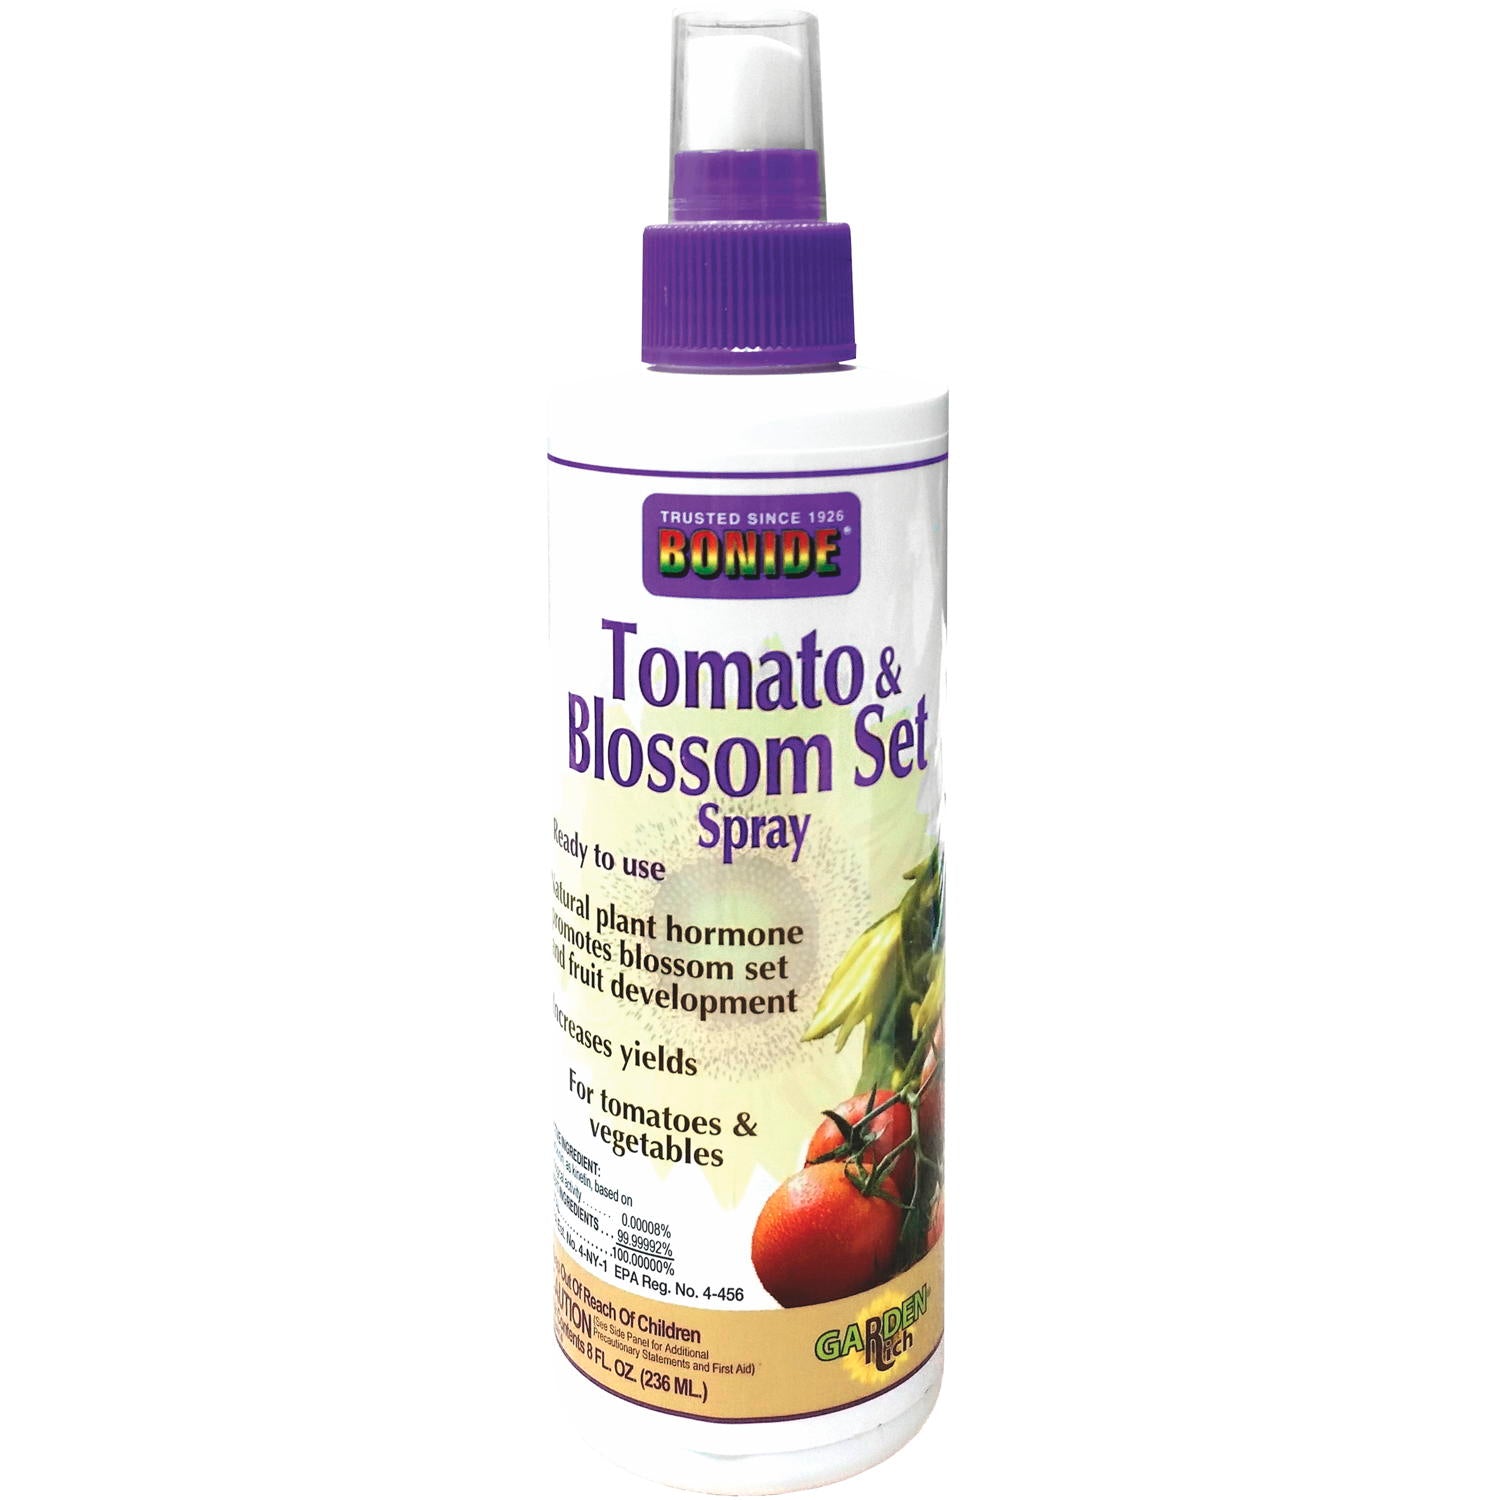 A natural hormone or pollination spray used to jumpstart growth on vegetable plants